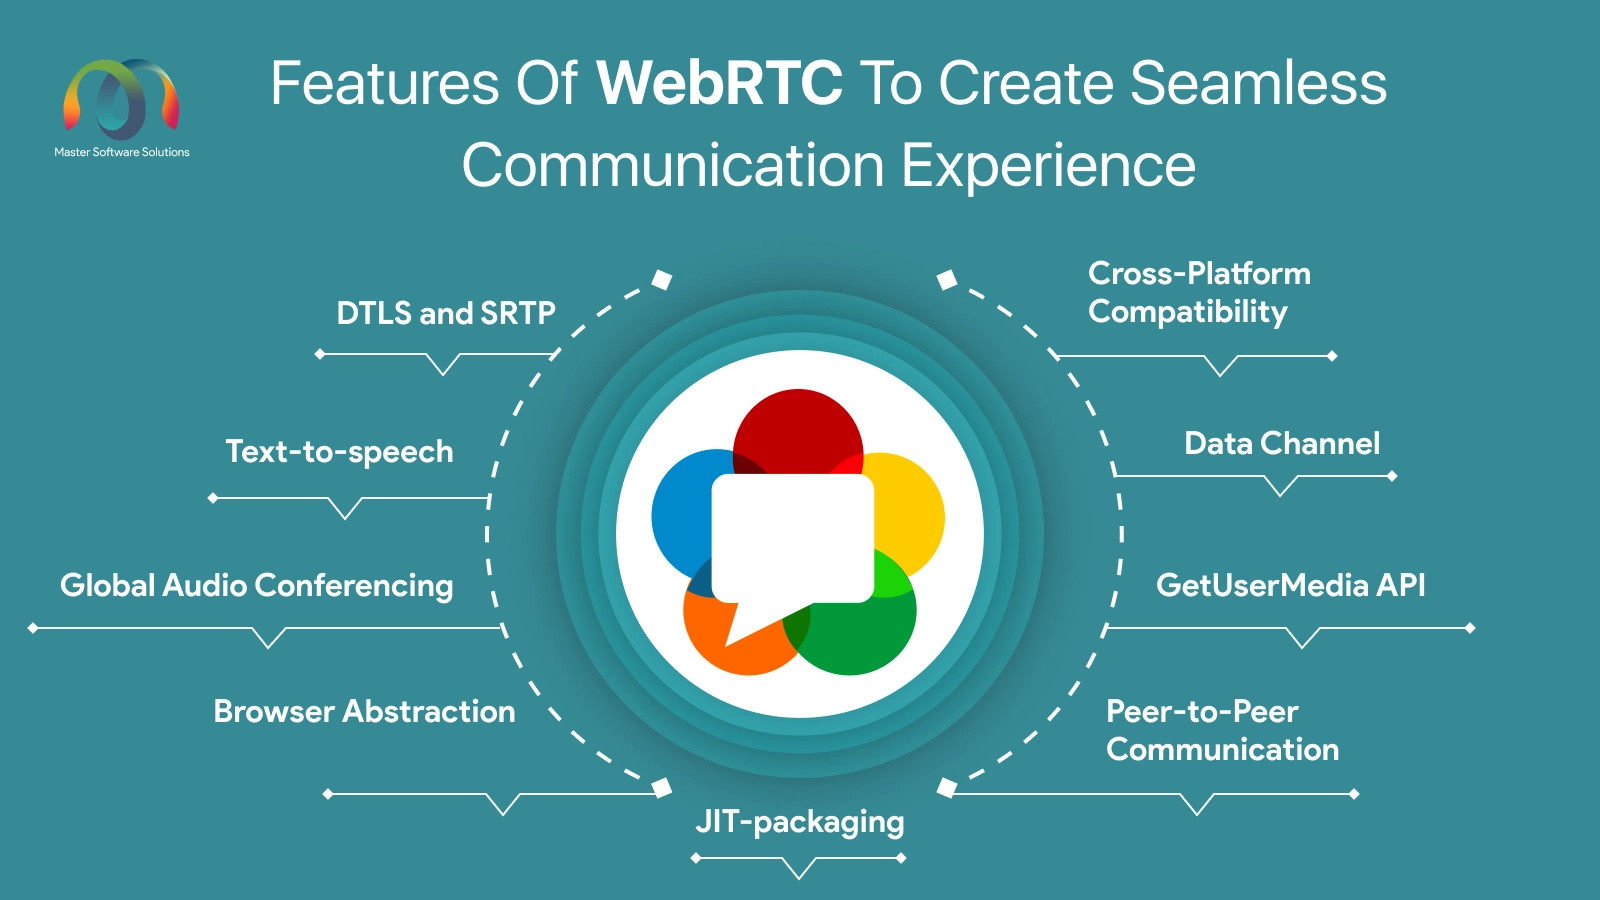 ravi garg, mss, features, webrtc, seamless communication, peer-to-peer communication, getusermedia api, data channel, cross-platform compatibility, DTLS and SRTP, text-to-speech, global; audio conferencing, browser abstraction, jit-packaging